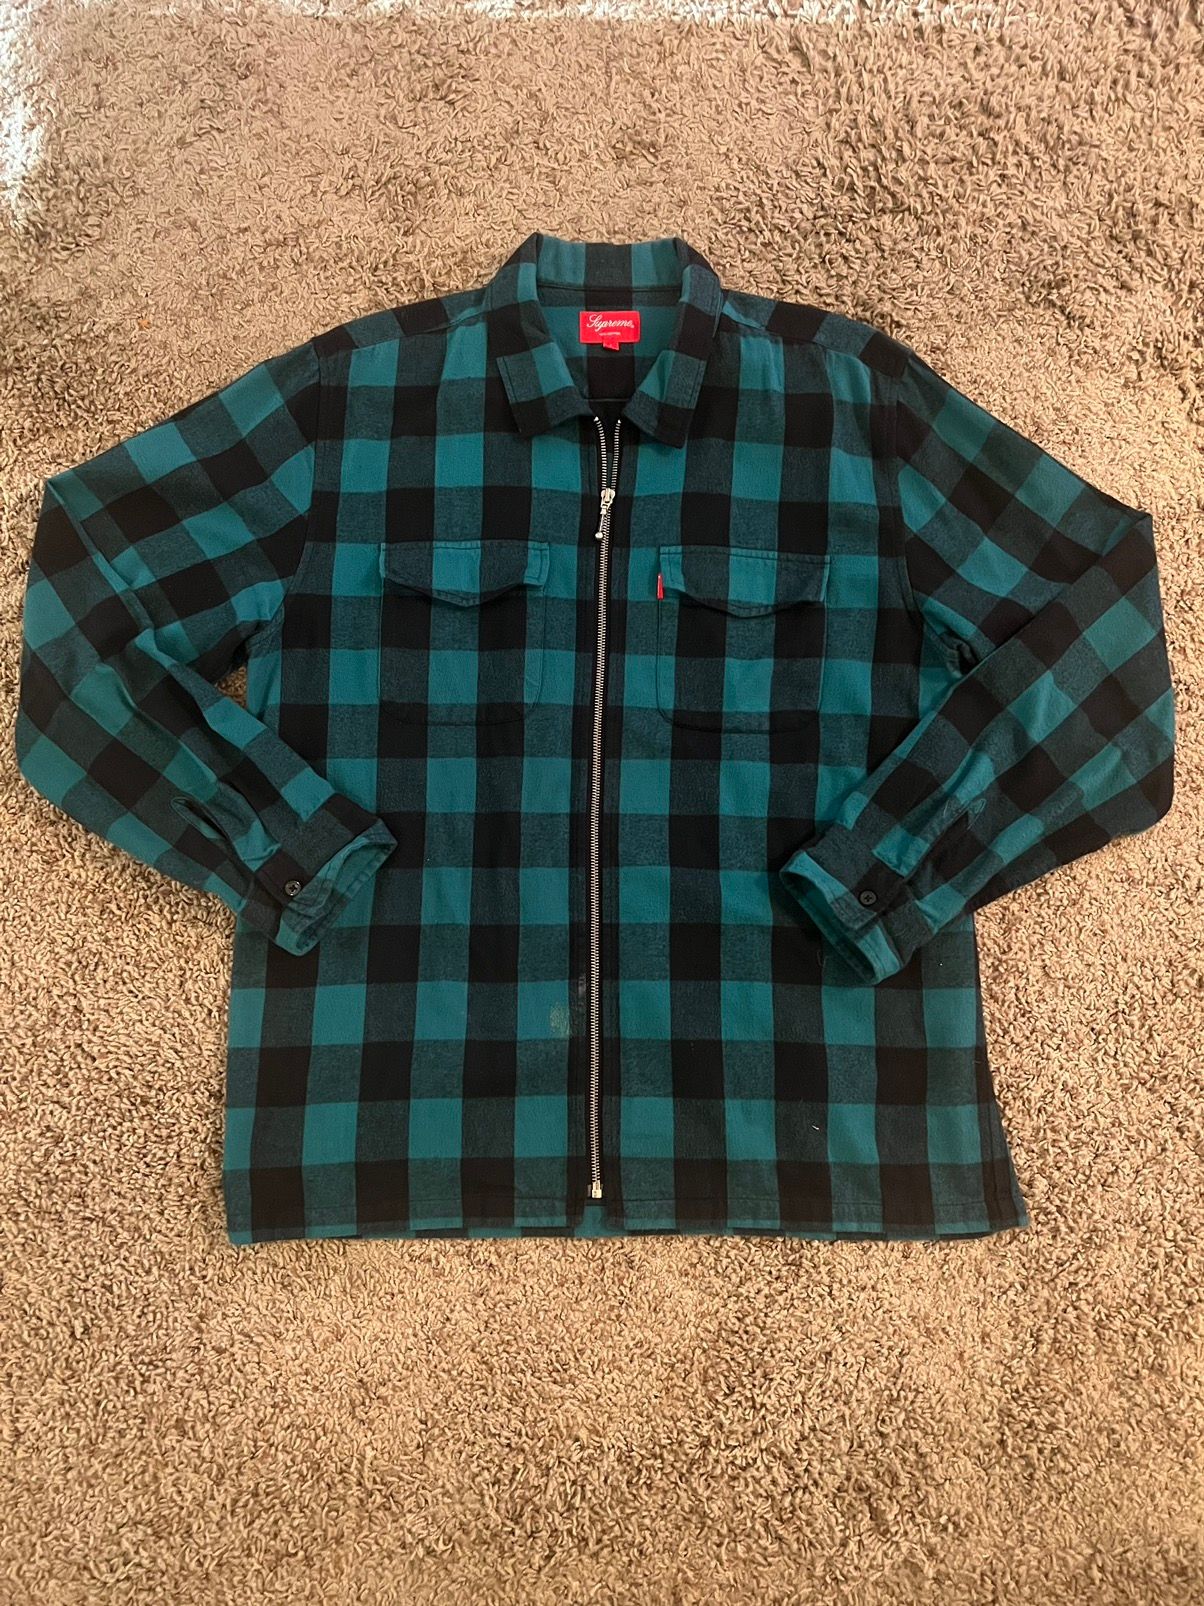 Pre-owned Supreme Plaid Flannel Zip Up Shirt Green